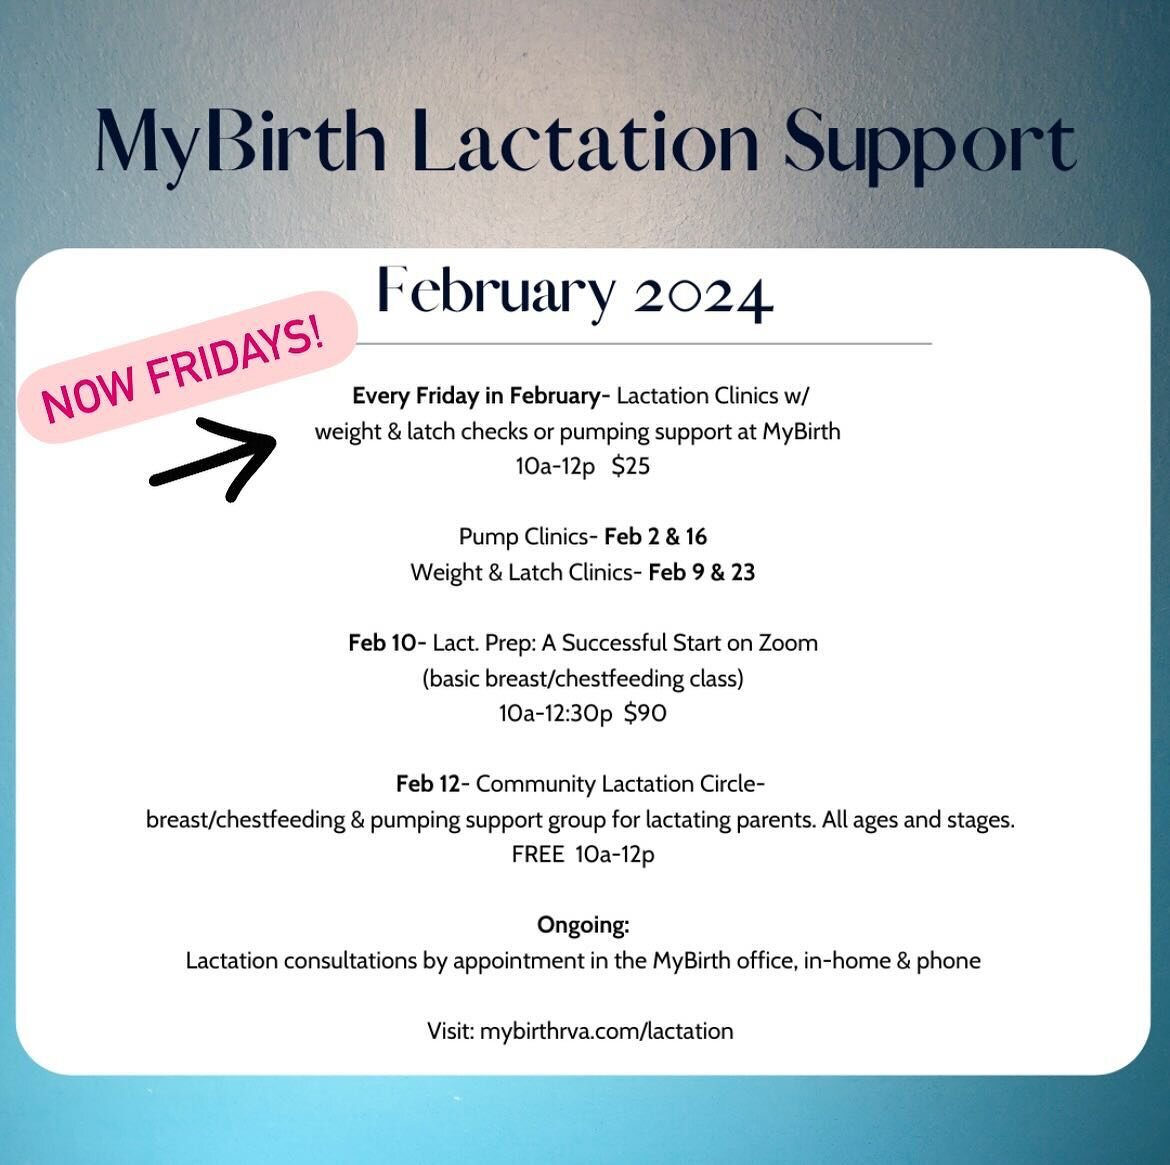 🌟 Lactation at MyBirth 🌟

LACTATION CLINIC 🌟 Every Friday🌟 @ MYBIRTH&nbsp;

PUMP clinic (1st, 3rd &amp; 5th Fri)
10:00AM-12:00PM will be held for drop-in flange fittings, explaining pump settings &amp; tricks to pump the most milk, milk storage a